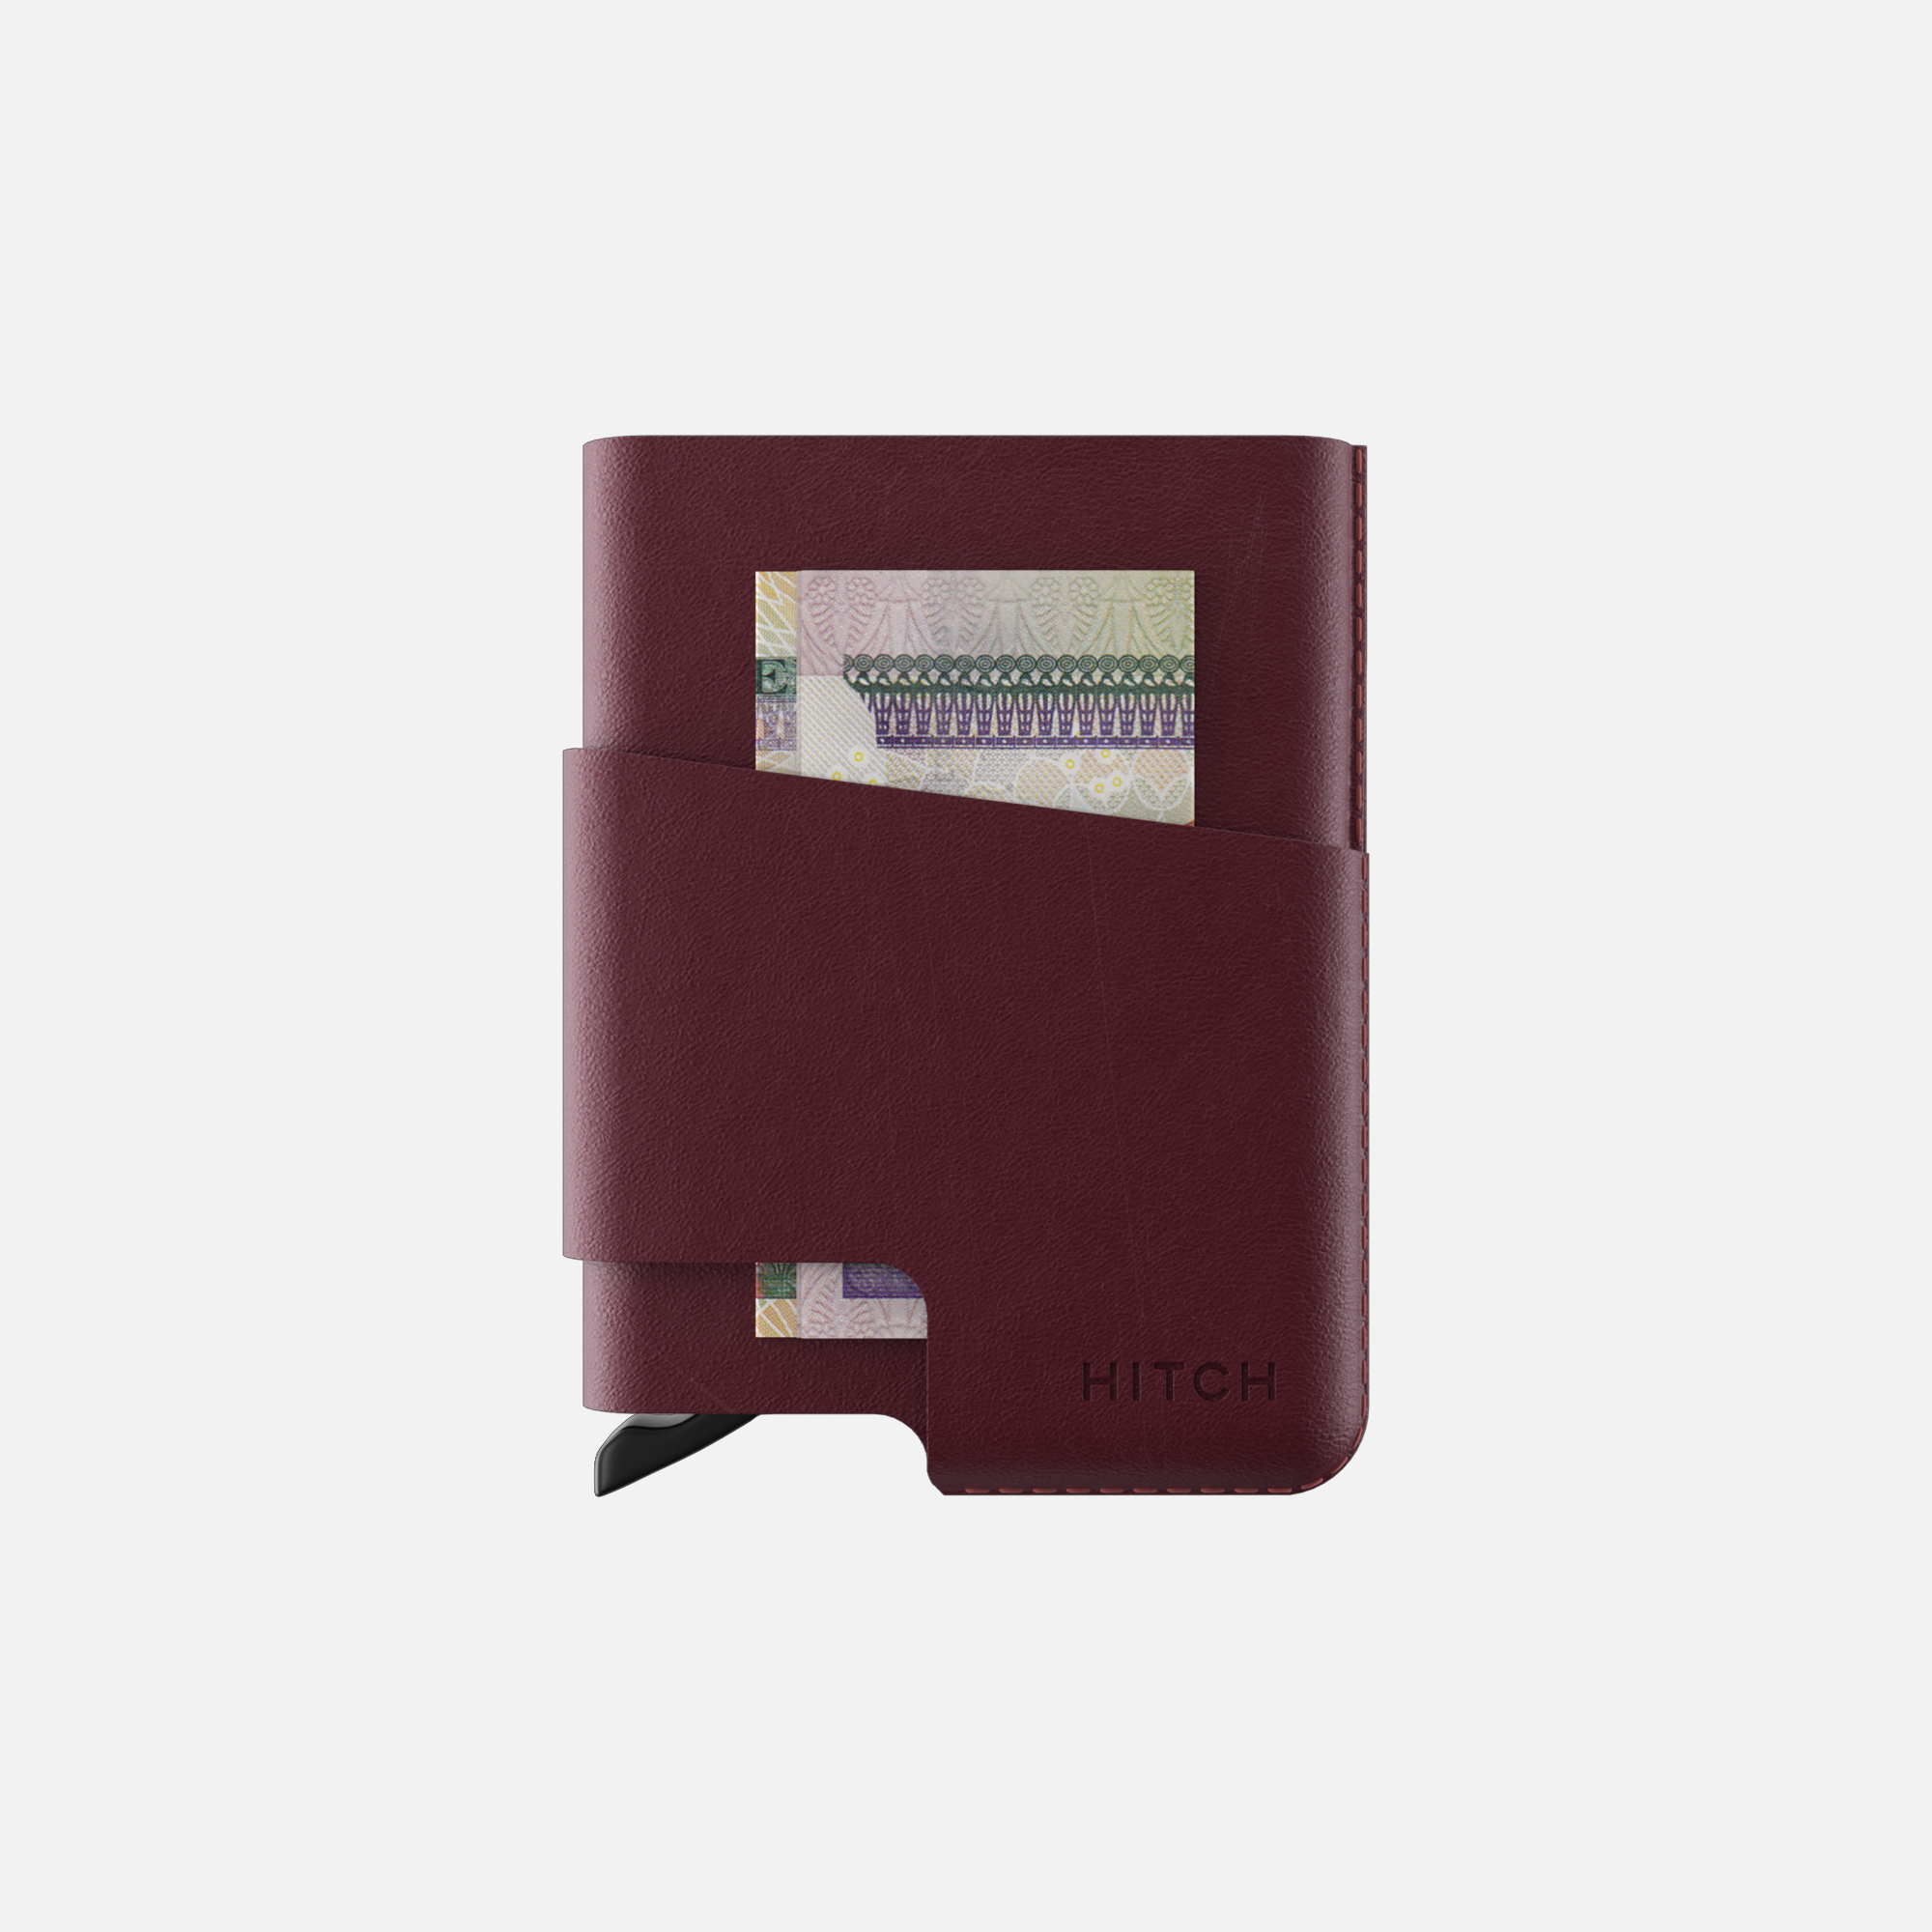 Burgundy leather cardholder wallet with money slot, embossed with brand "HITCH".